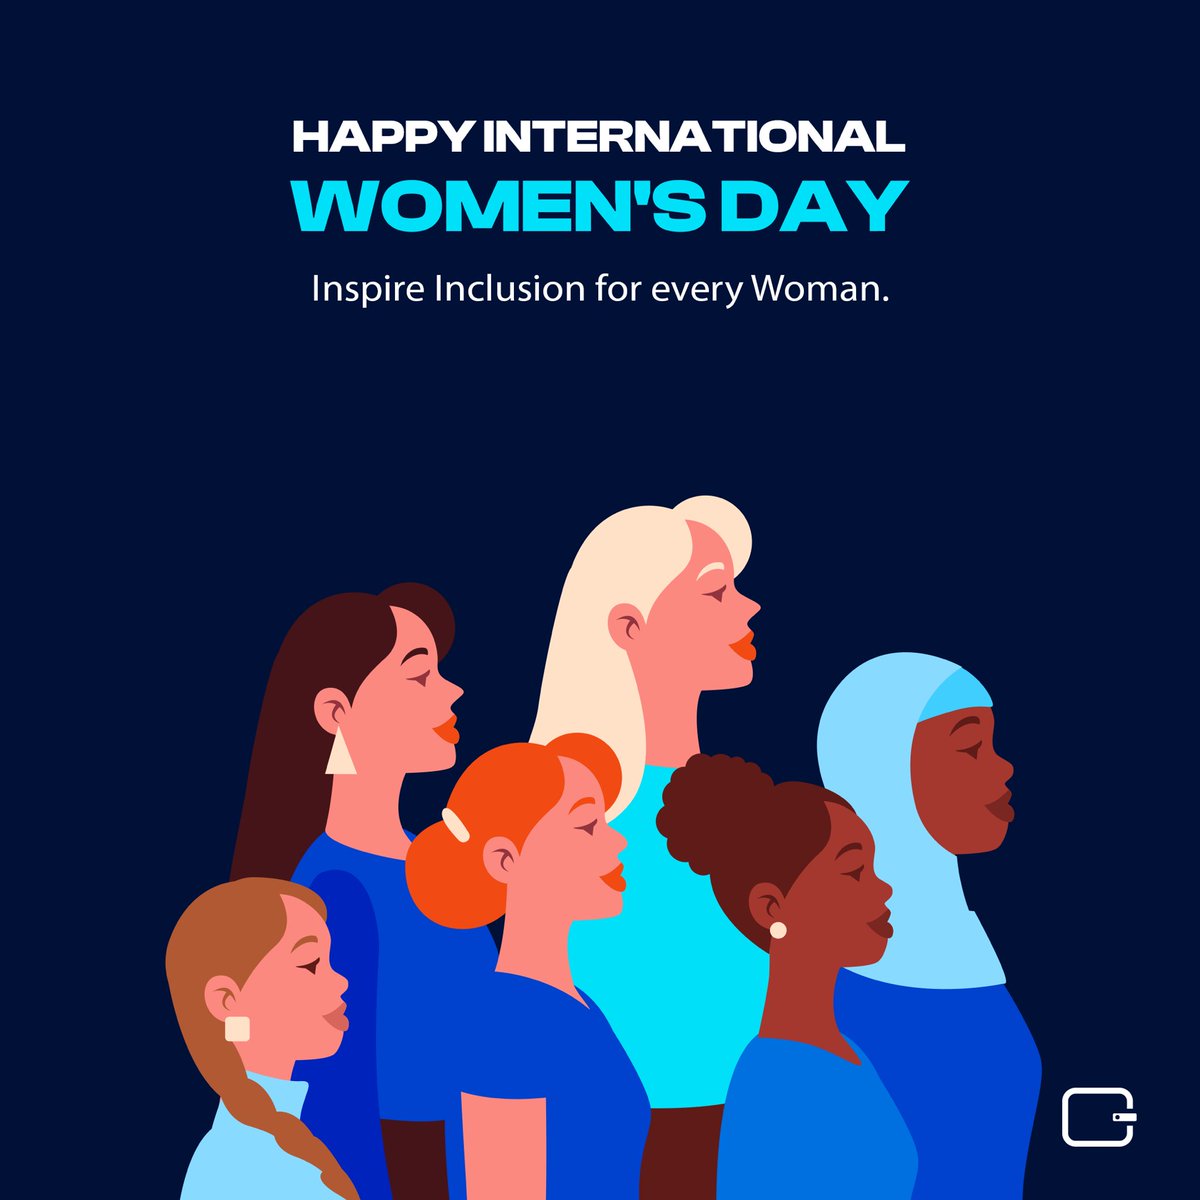 When we invest in women, we invest in a stronger, more prosperous future.
Let us break down barriers and unlock the full potential of women globally!

Happy International Women's Day! With love from all of us at Marasoft Pay
#MarasoftPay #inspireinclusion #iwd2024